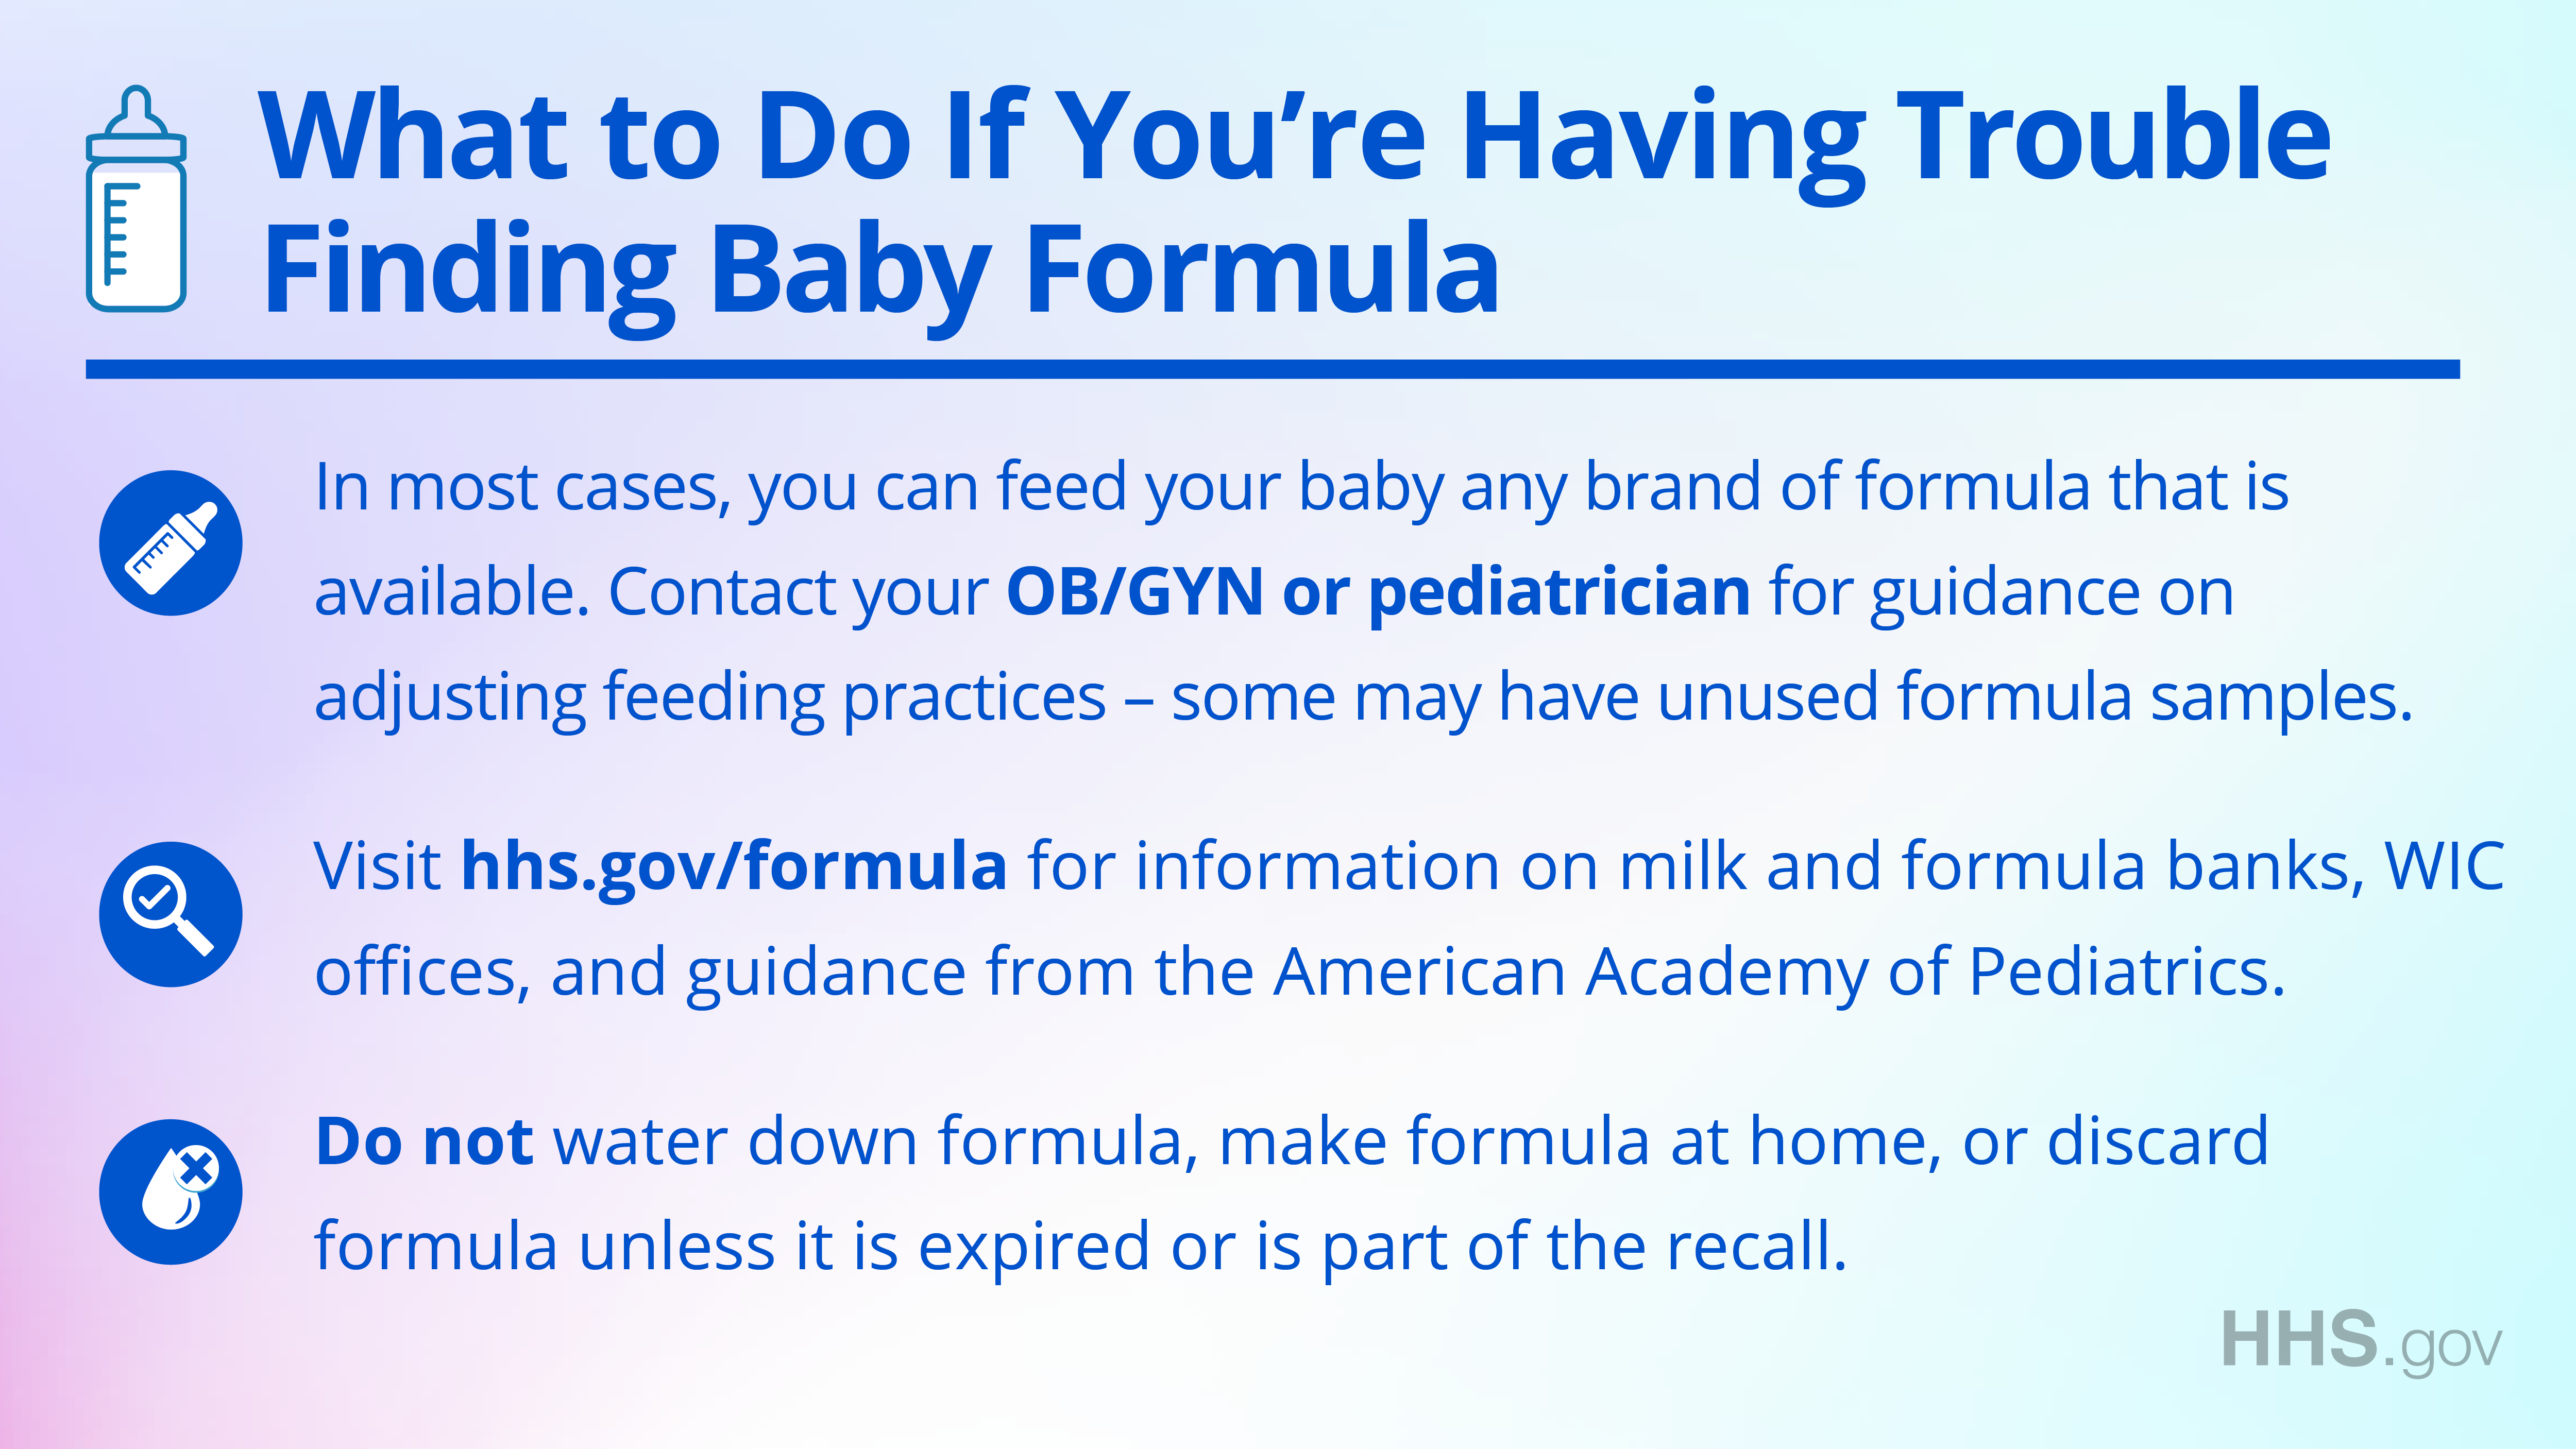 Facebook/Twitter graphic explaining in English what to do if you're having trouble finding baby formula. In most cases, you can feed you baby any brand of formula that is available. Contact your OB/GYN or pediatrician for guidance on adjusting feeding practices - some may have unused formula samples. Second, visit hhs.gov/formula for information on milk and formula banks, WIC offices, and guidance from the American Academy of Pediatrics. Third, do not water down formula, make formula at home, or discard formula unless it is expired or is part of the recall.